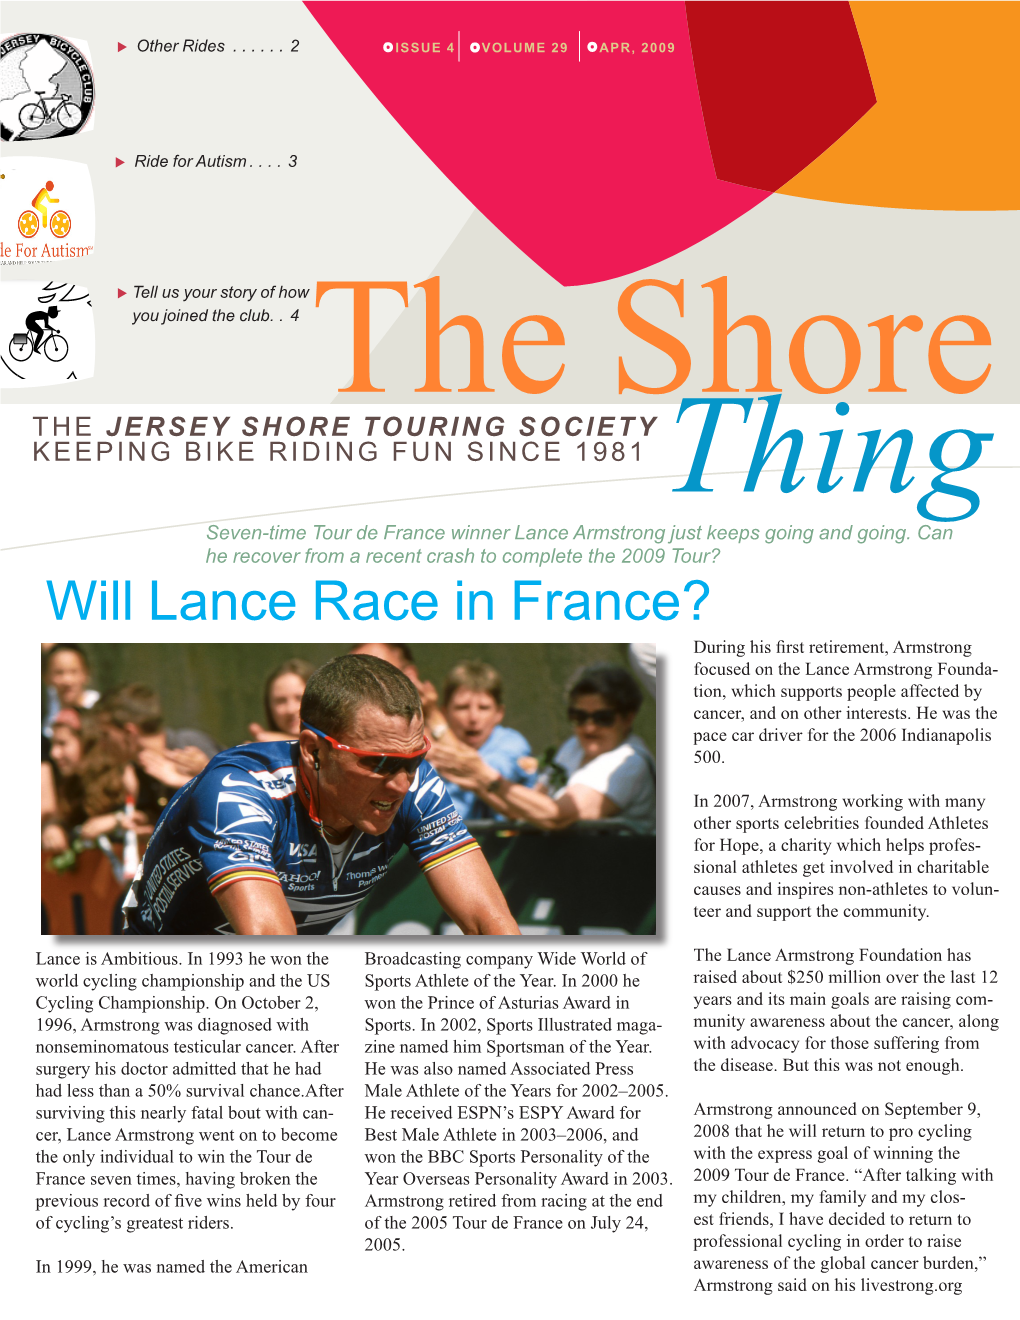 Will Lance Race in France?